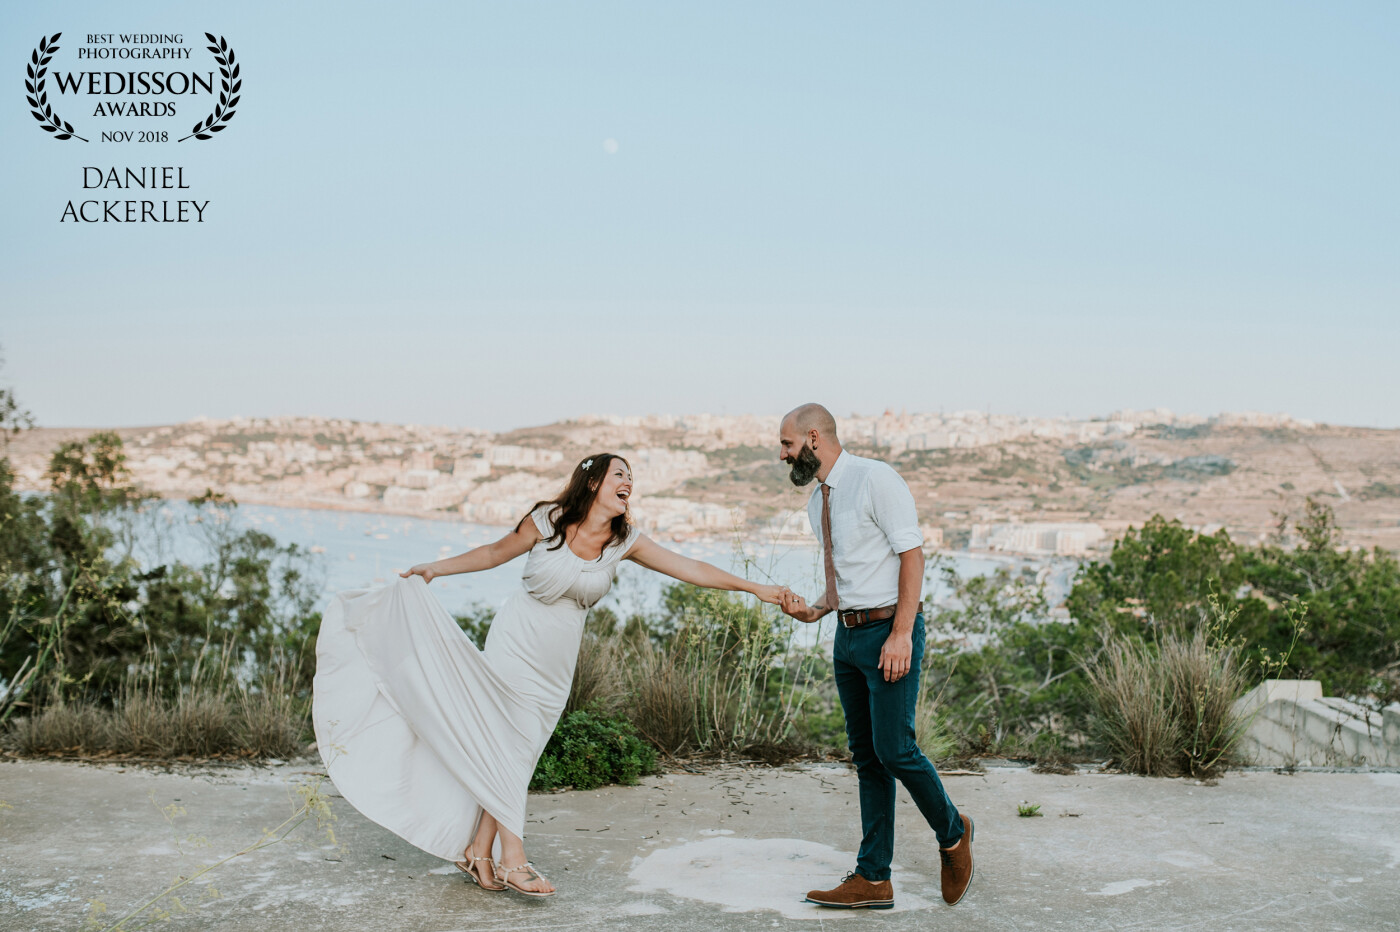 Captured in the hills above Mellieħa Bay in Malta, this image of David & Lisa sharing their proper 1st dance, all alone in the ruins of an abandoned hotel, is one of my favourites of 2018!